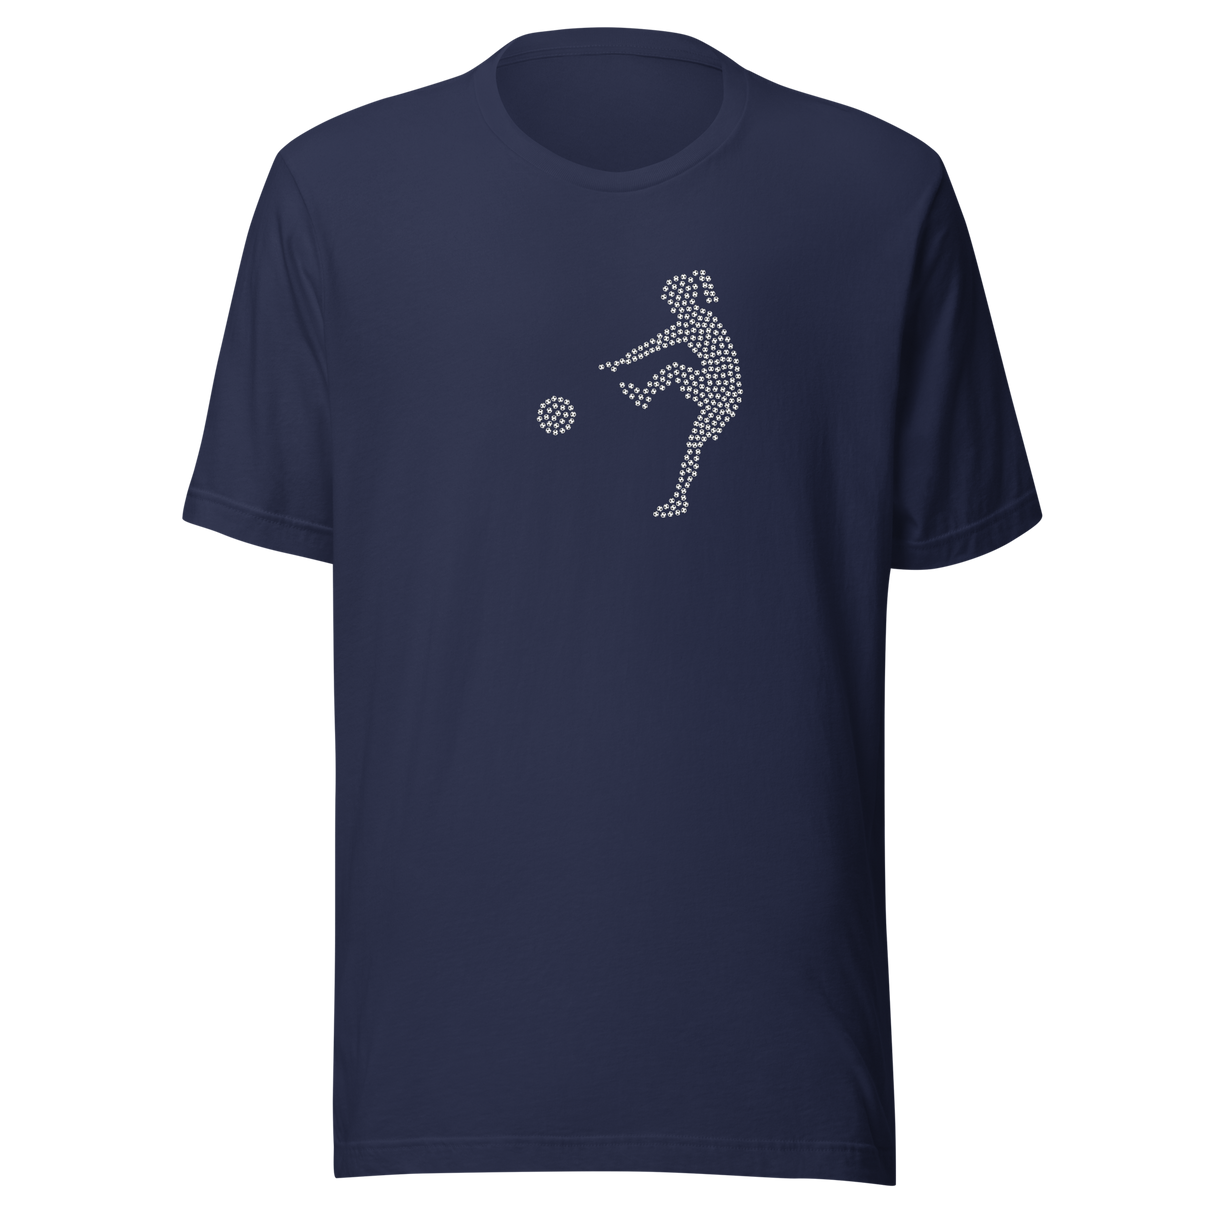 girl-playing-soccer-silhouette-image-made-from-many-soccer-balls-soccer-tee-girls-t-shirt-football-tee-sports-t-shirt-gift-tee#color_navy